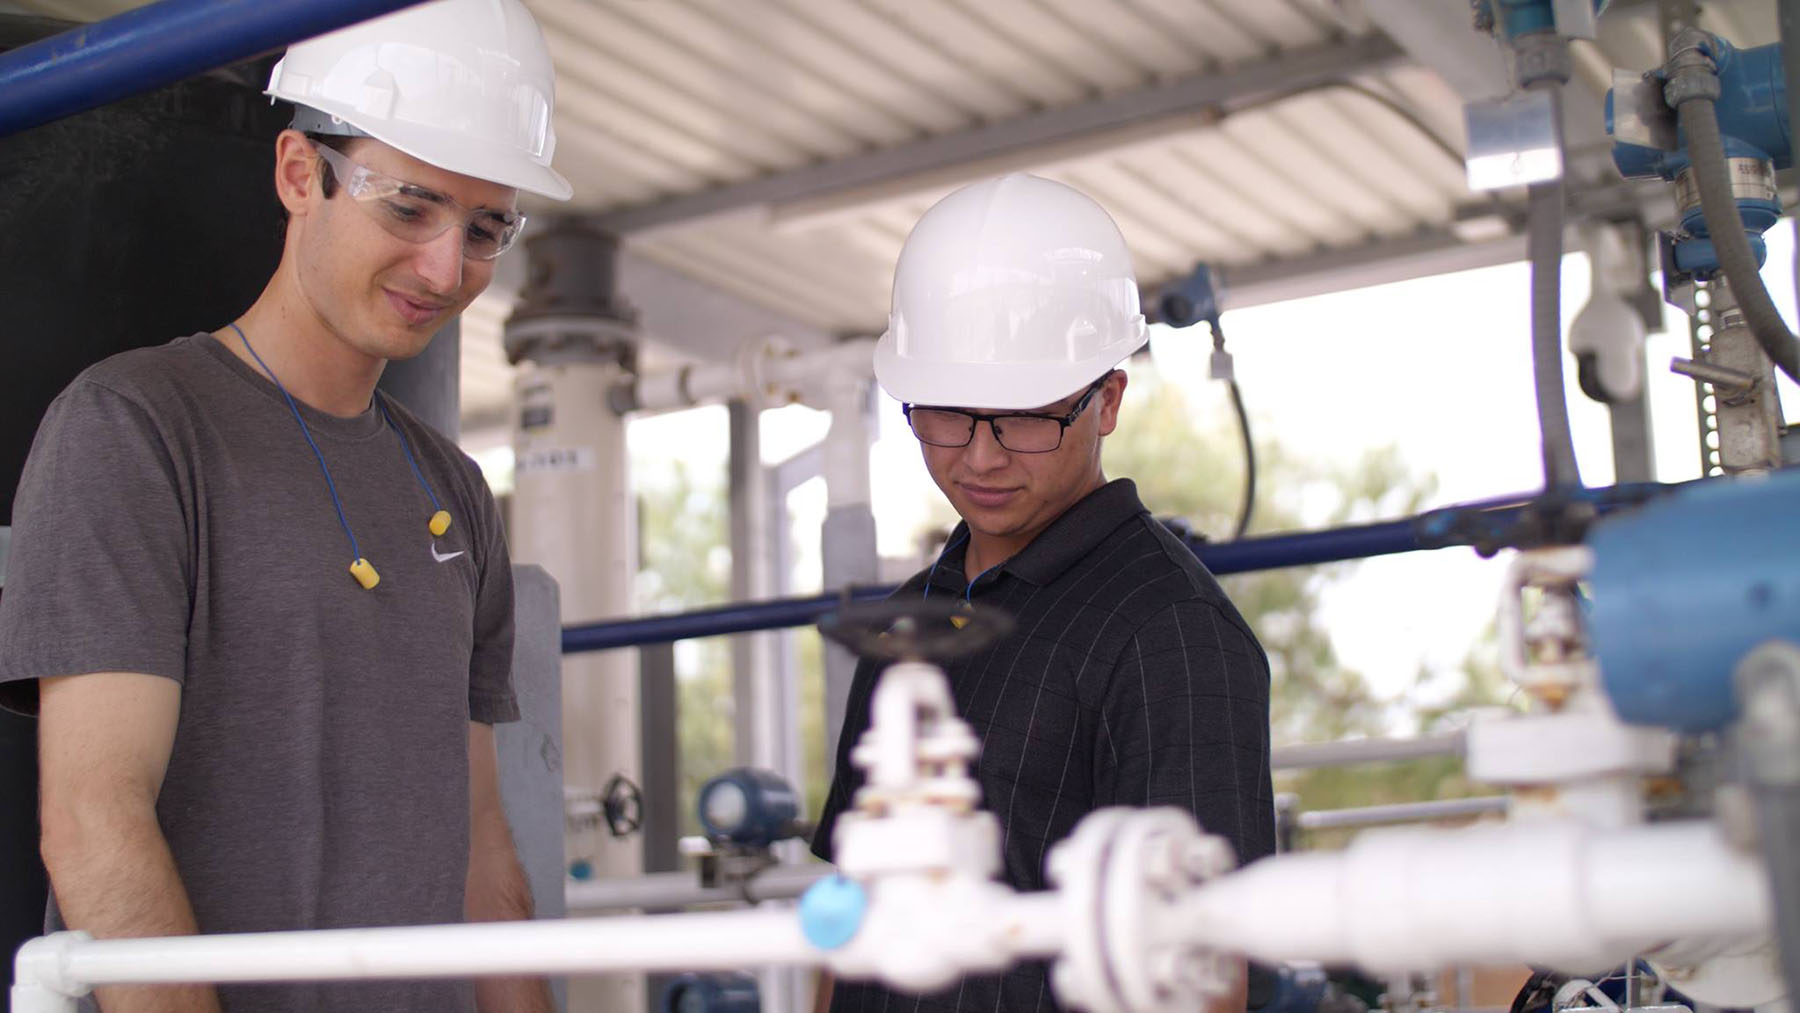 Instrumentation students work together in the field.